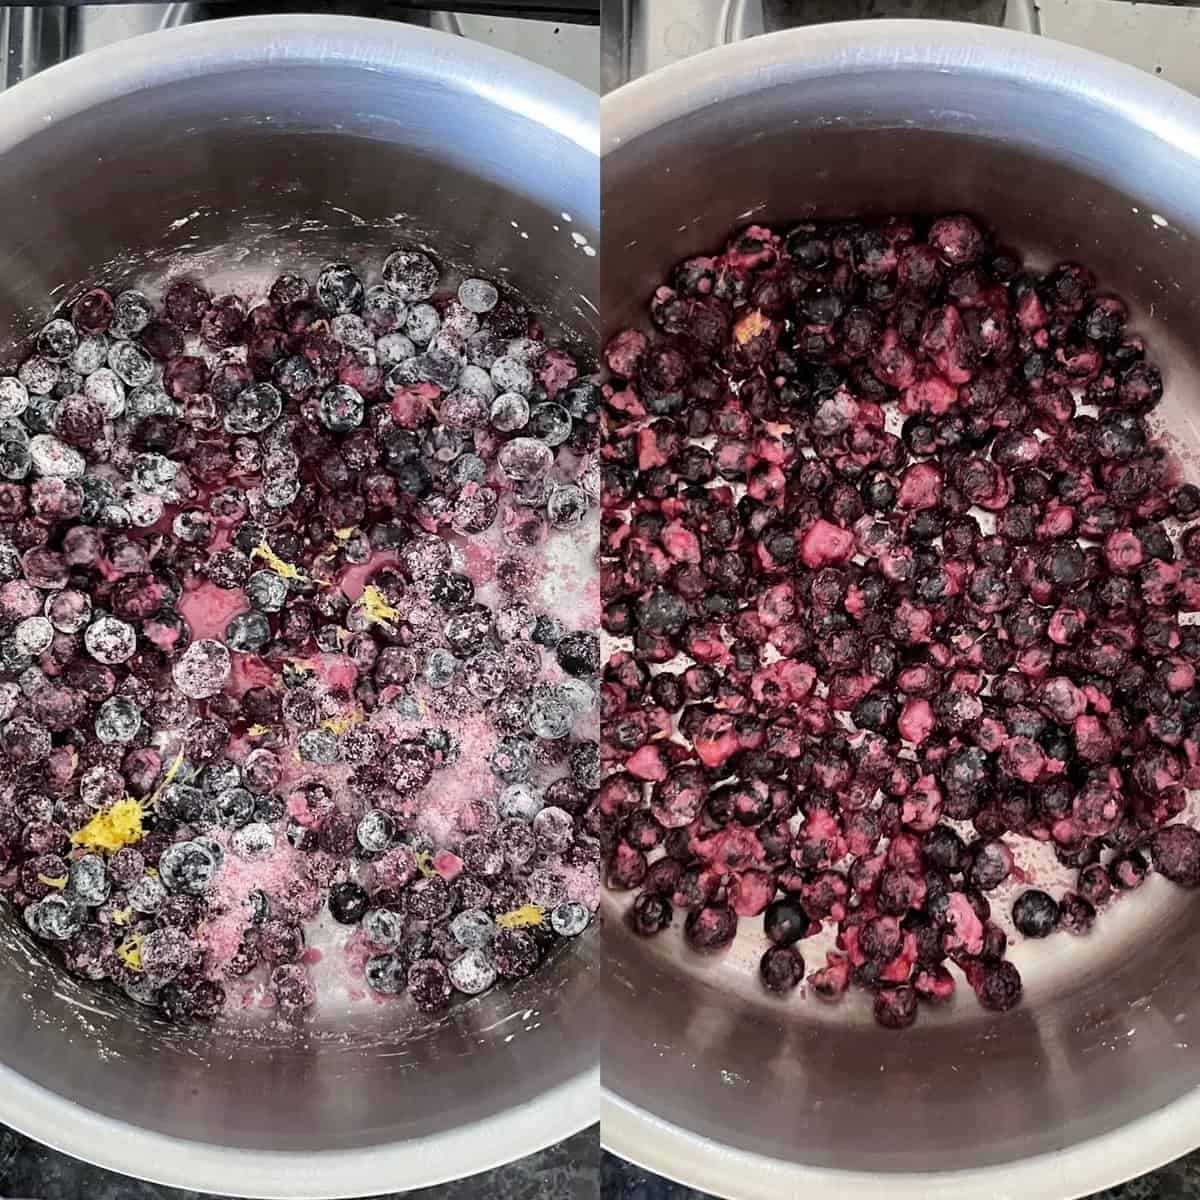 two panels showing blueberries before and after macerating with sugar, cornstarch, and lemon.